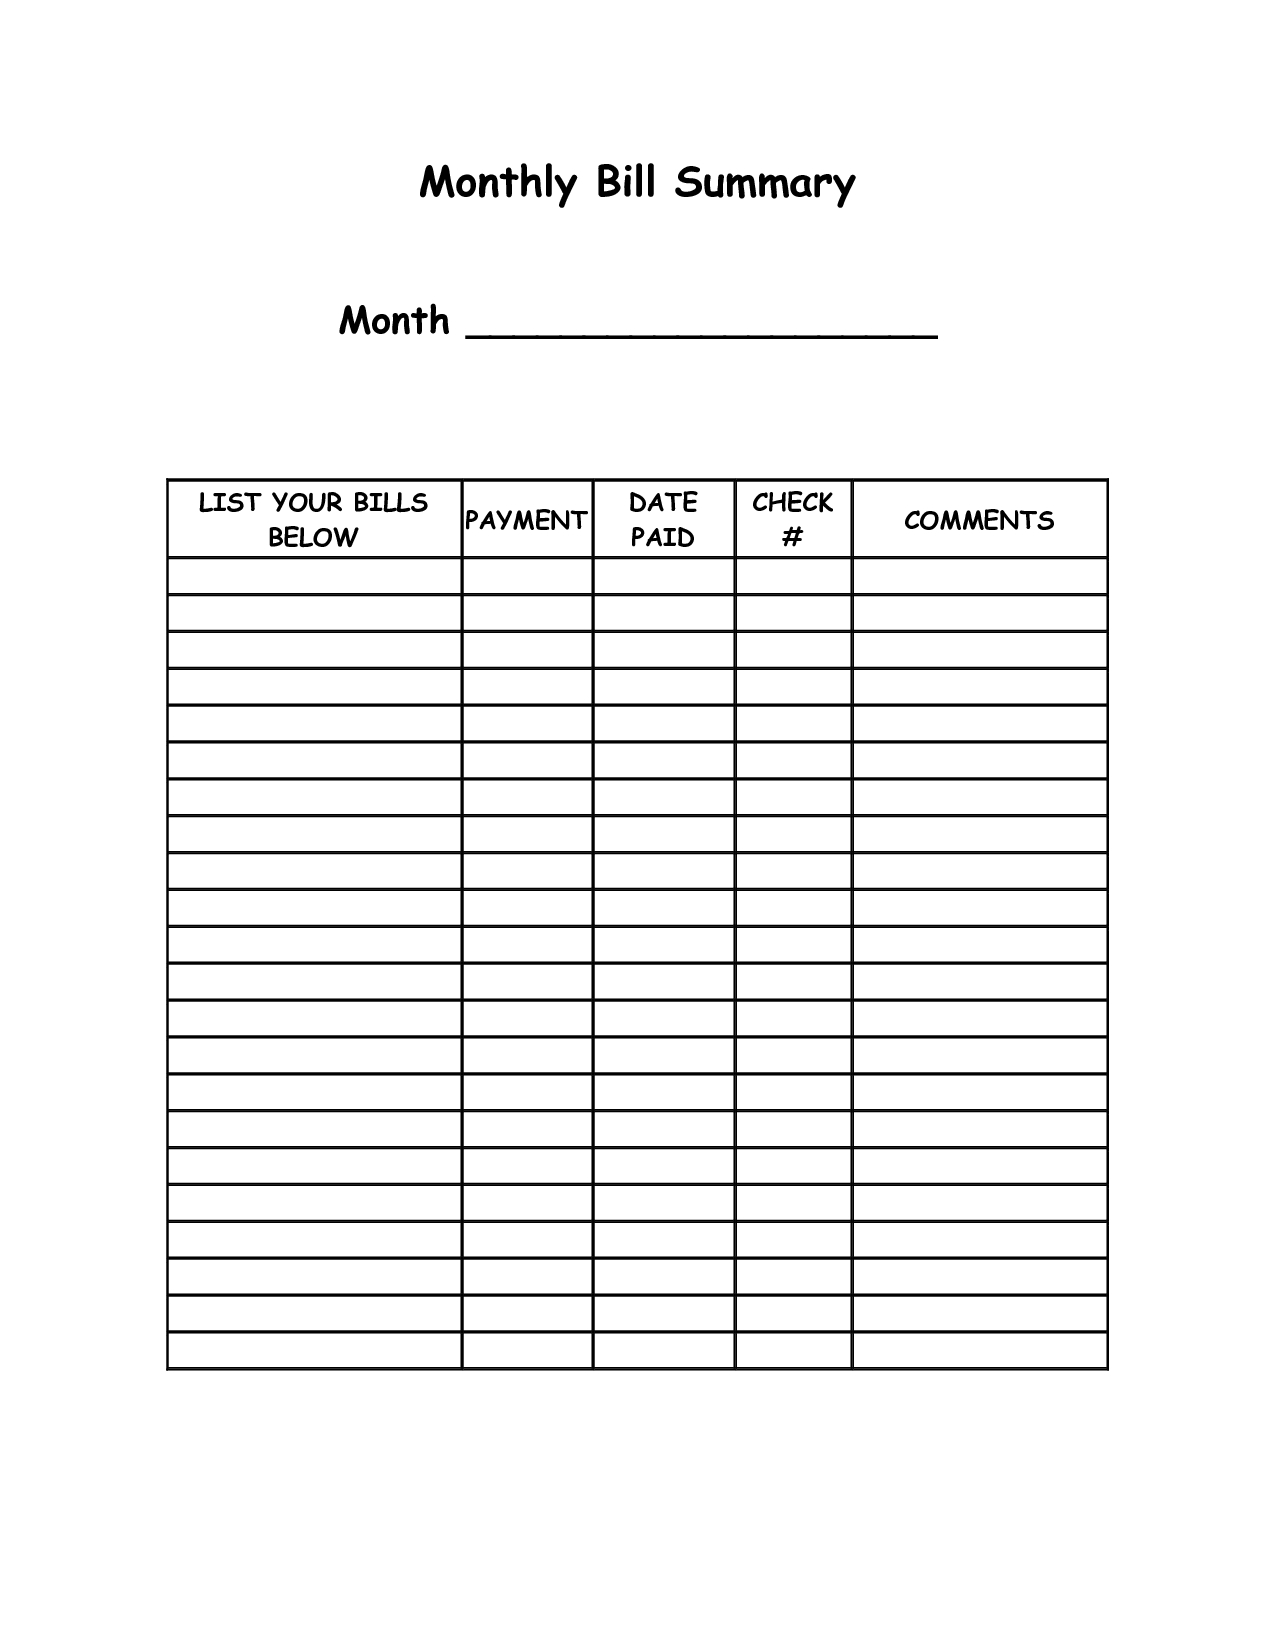 Monthly Bill Summary Doc | Organization | Organizing Monthly  Monthly Bill Payment Free Fillable